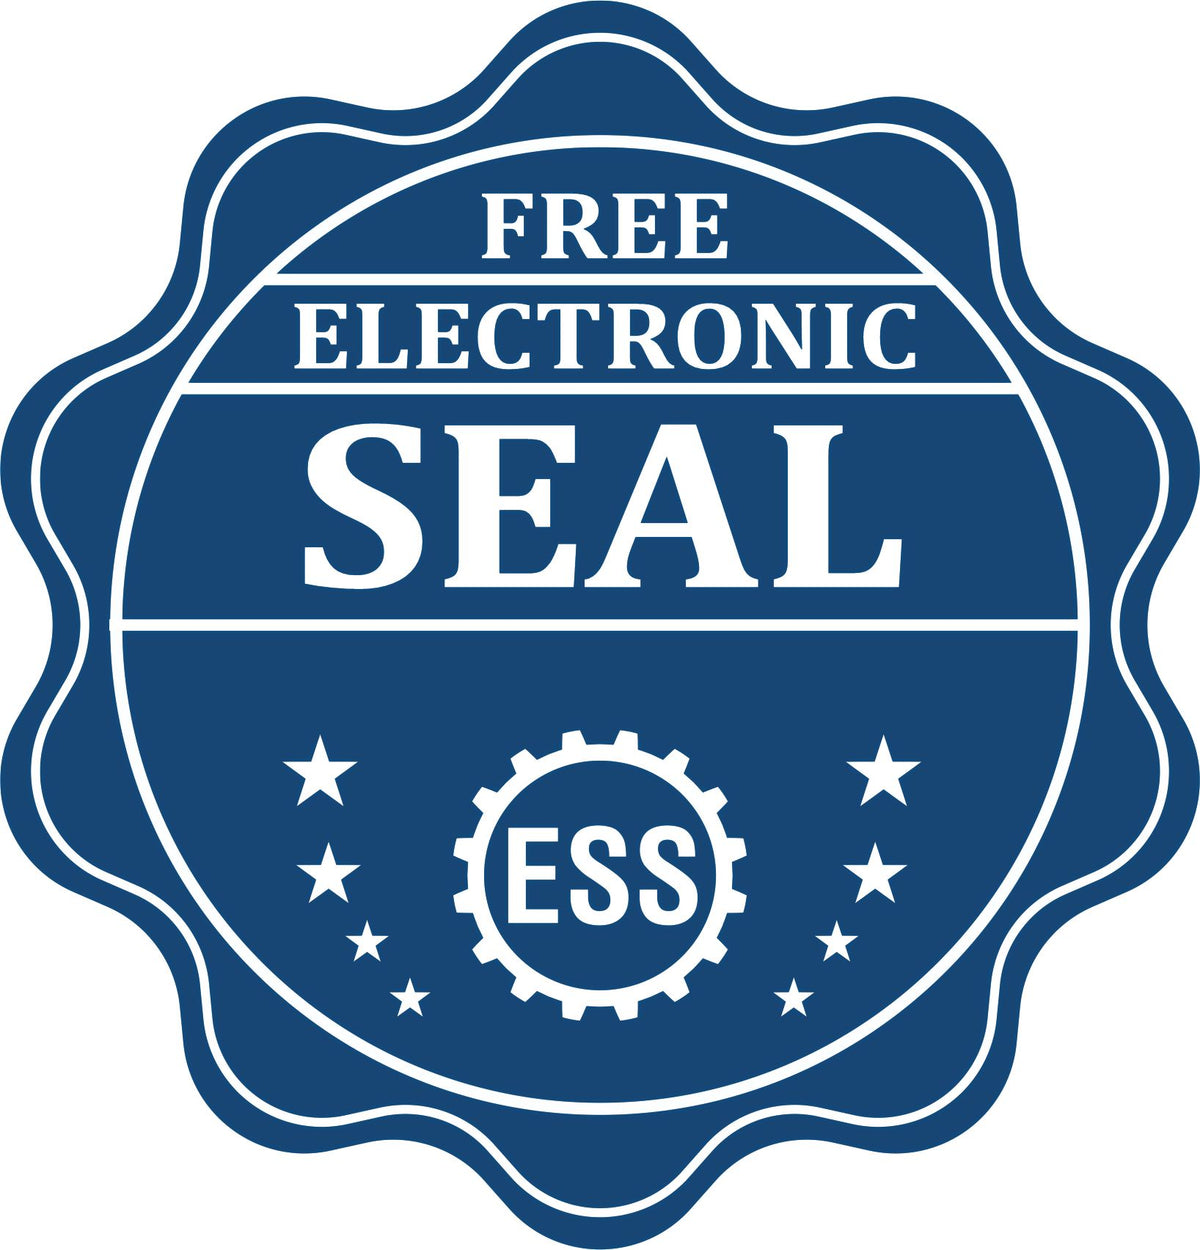 A badge showing a free electronic seal for the Handheld Florida Land Surveyor Seal with stars and the ESS gear on the emblem.